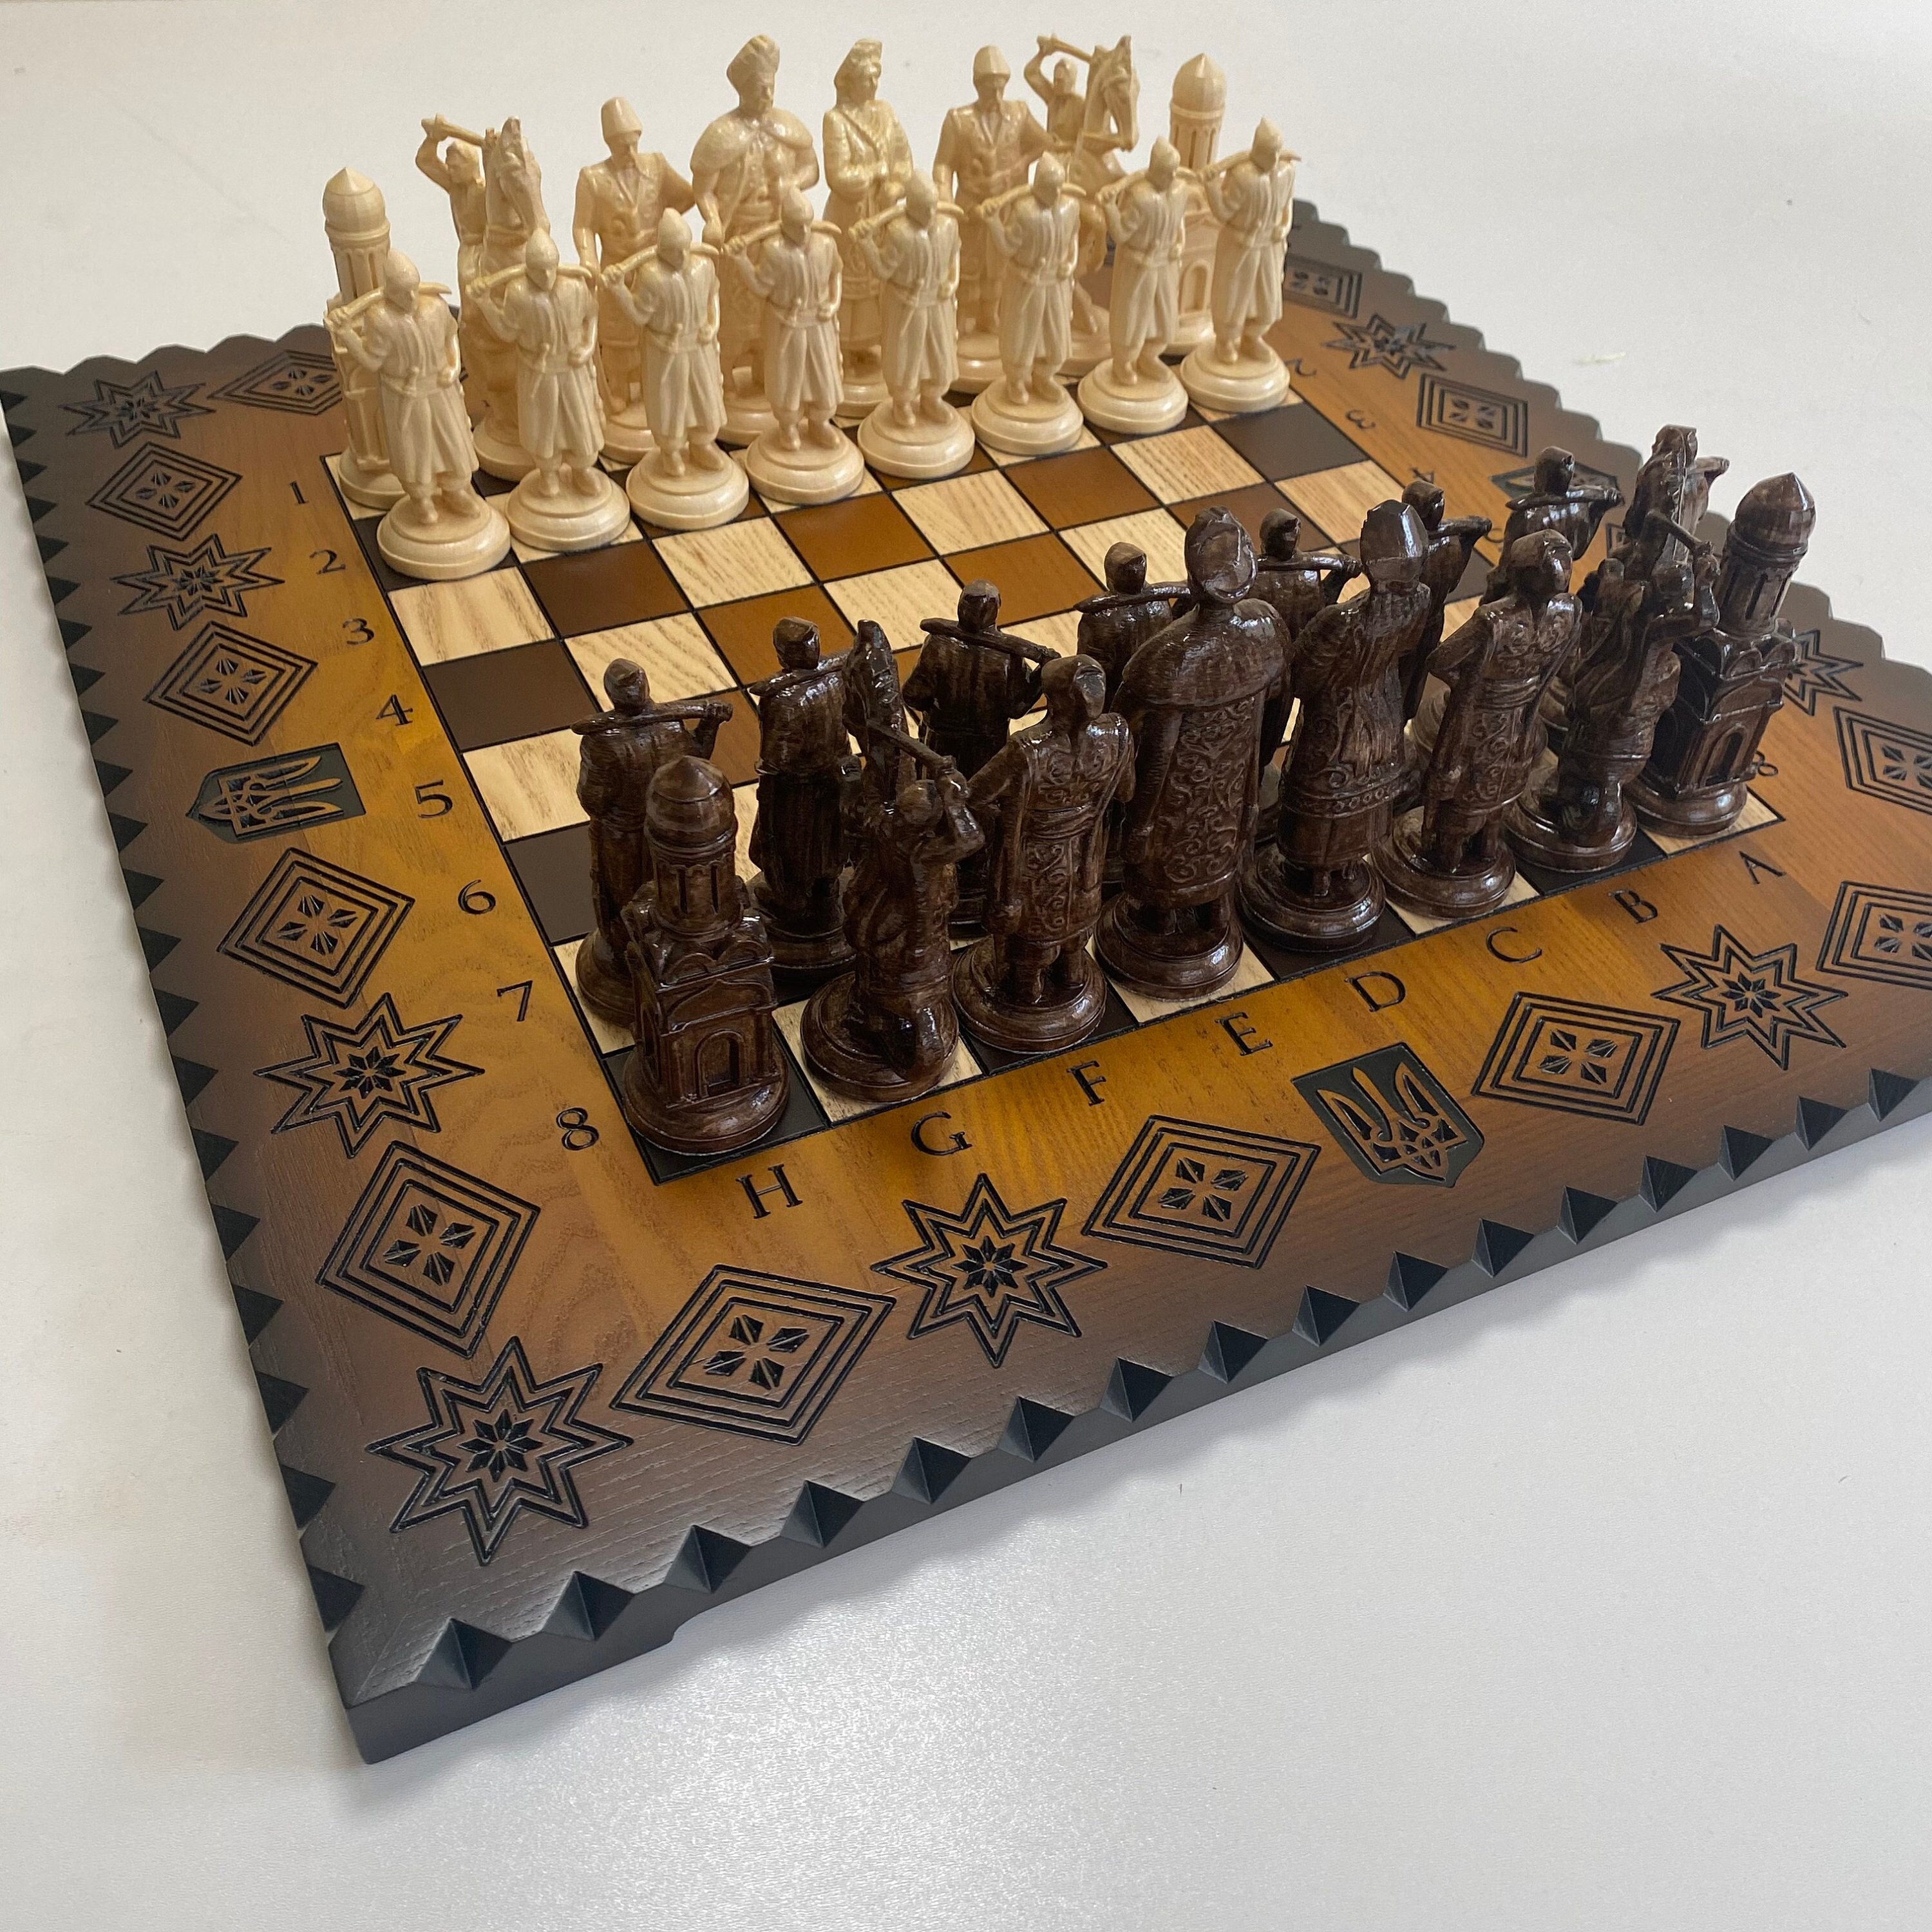 Buy Chess Auto Magnet Toy Board Game 8 in 1 from Japan - Buy authentic Plus  exclusive items from Japan